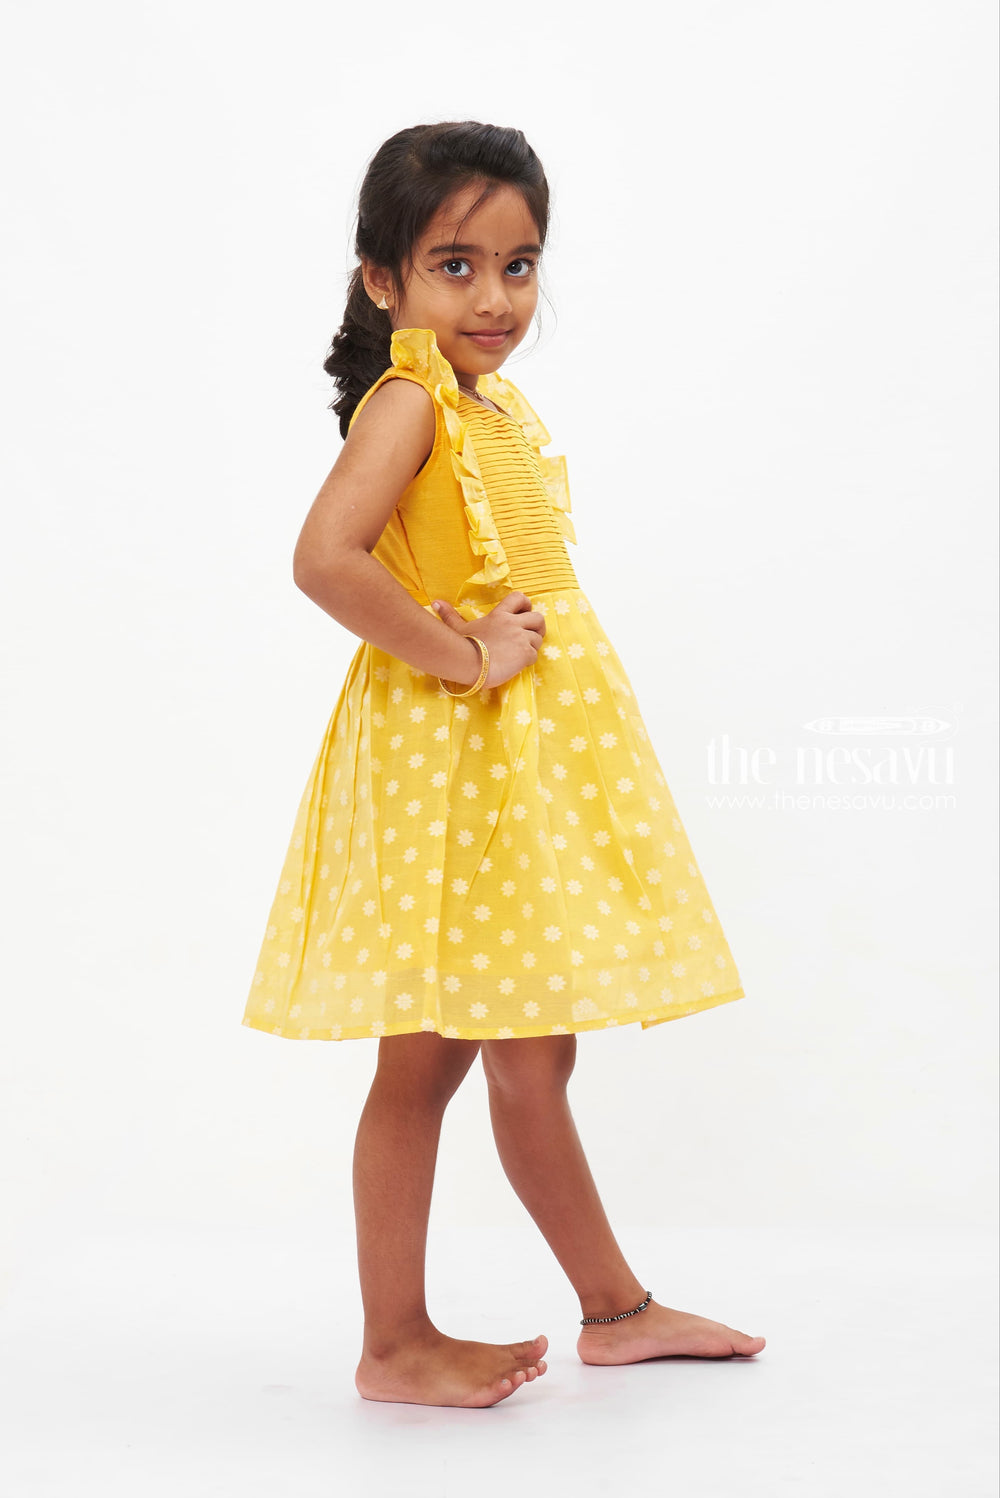 The Nesavu Baby Cotton Frocks Sunny Yellow Ruffle Sleeve Baby Frock with Daisy Accents for Girls Nesavu Girls Yellow Daisy Print Dress with Ruffle Sleeves | Baby Cotton Frock | The Nesavu